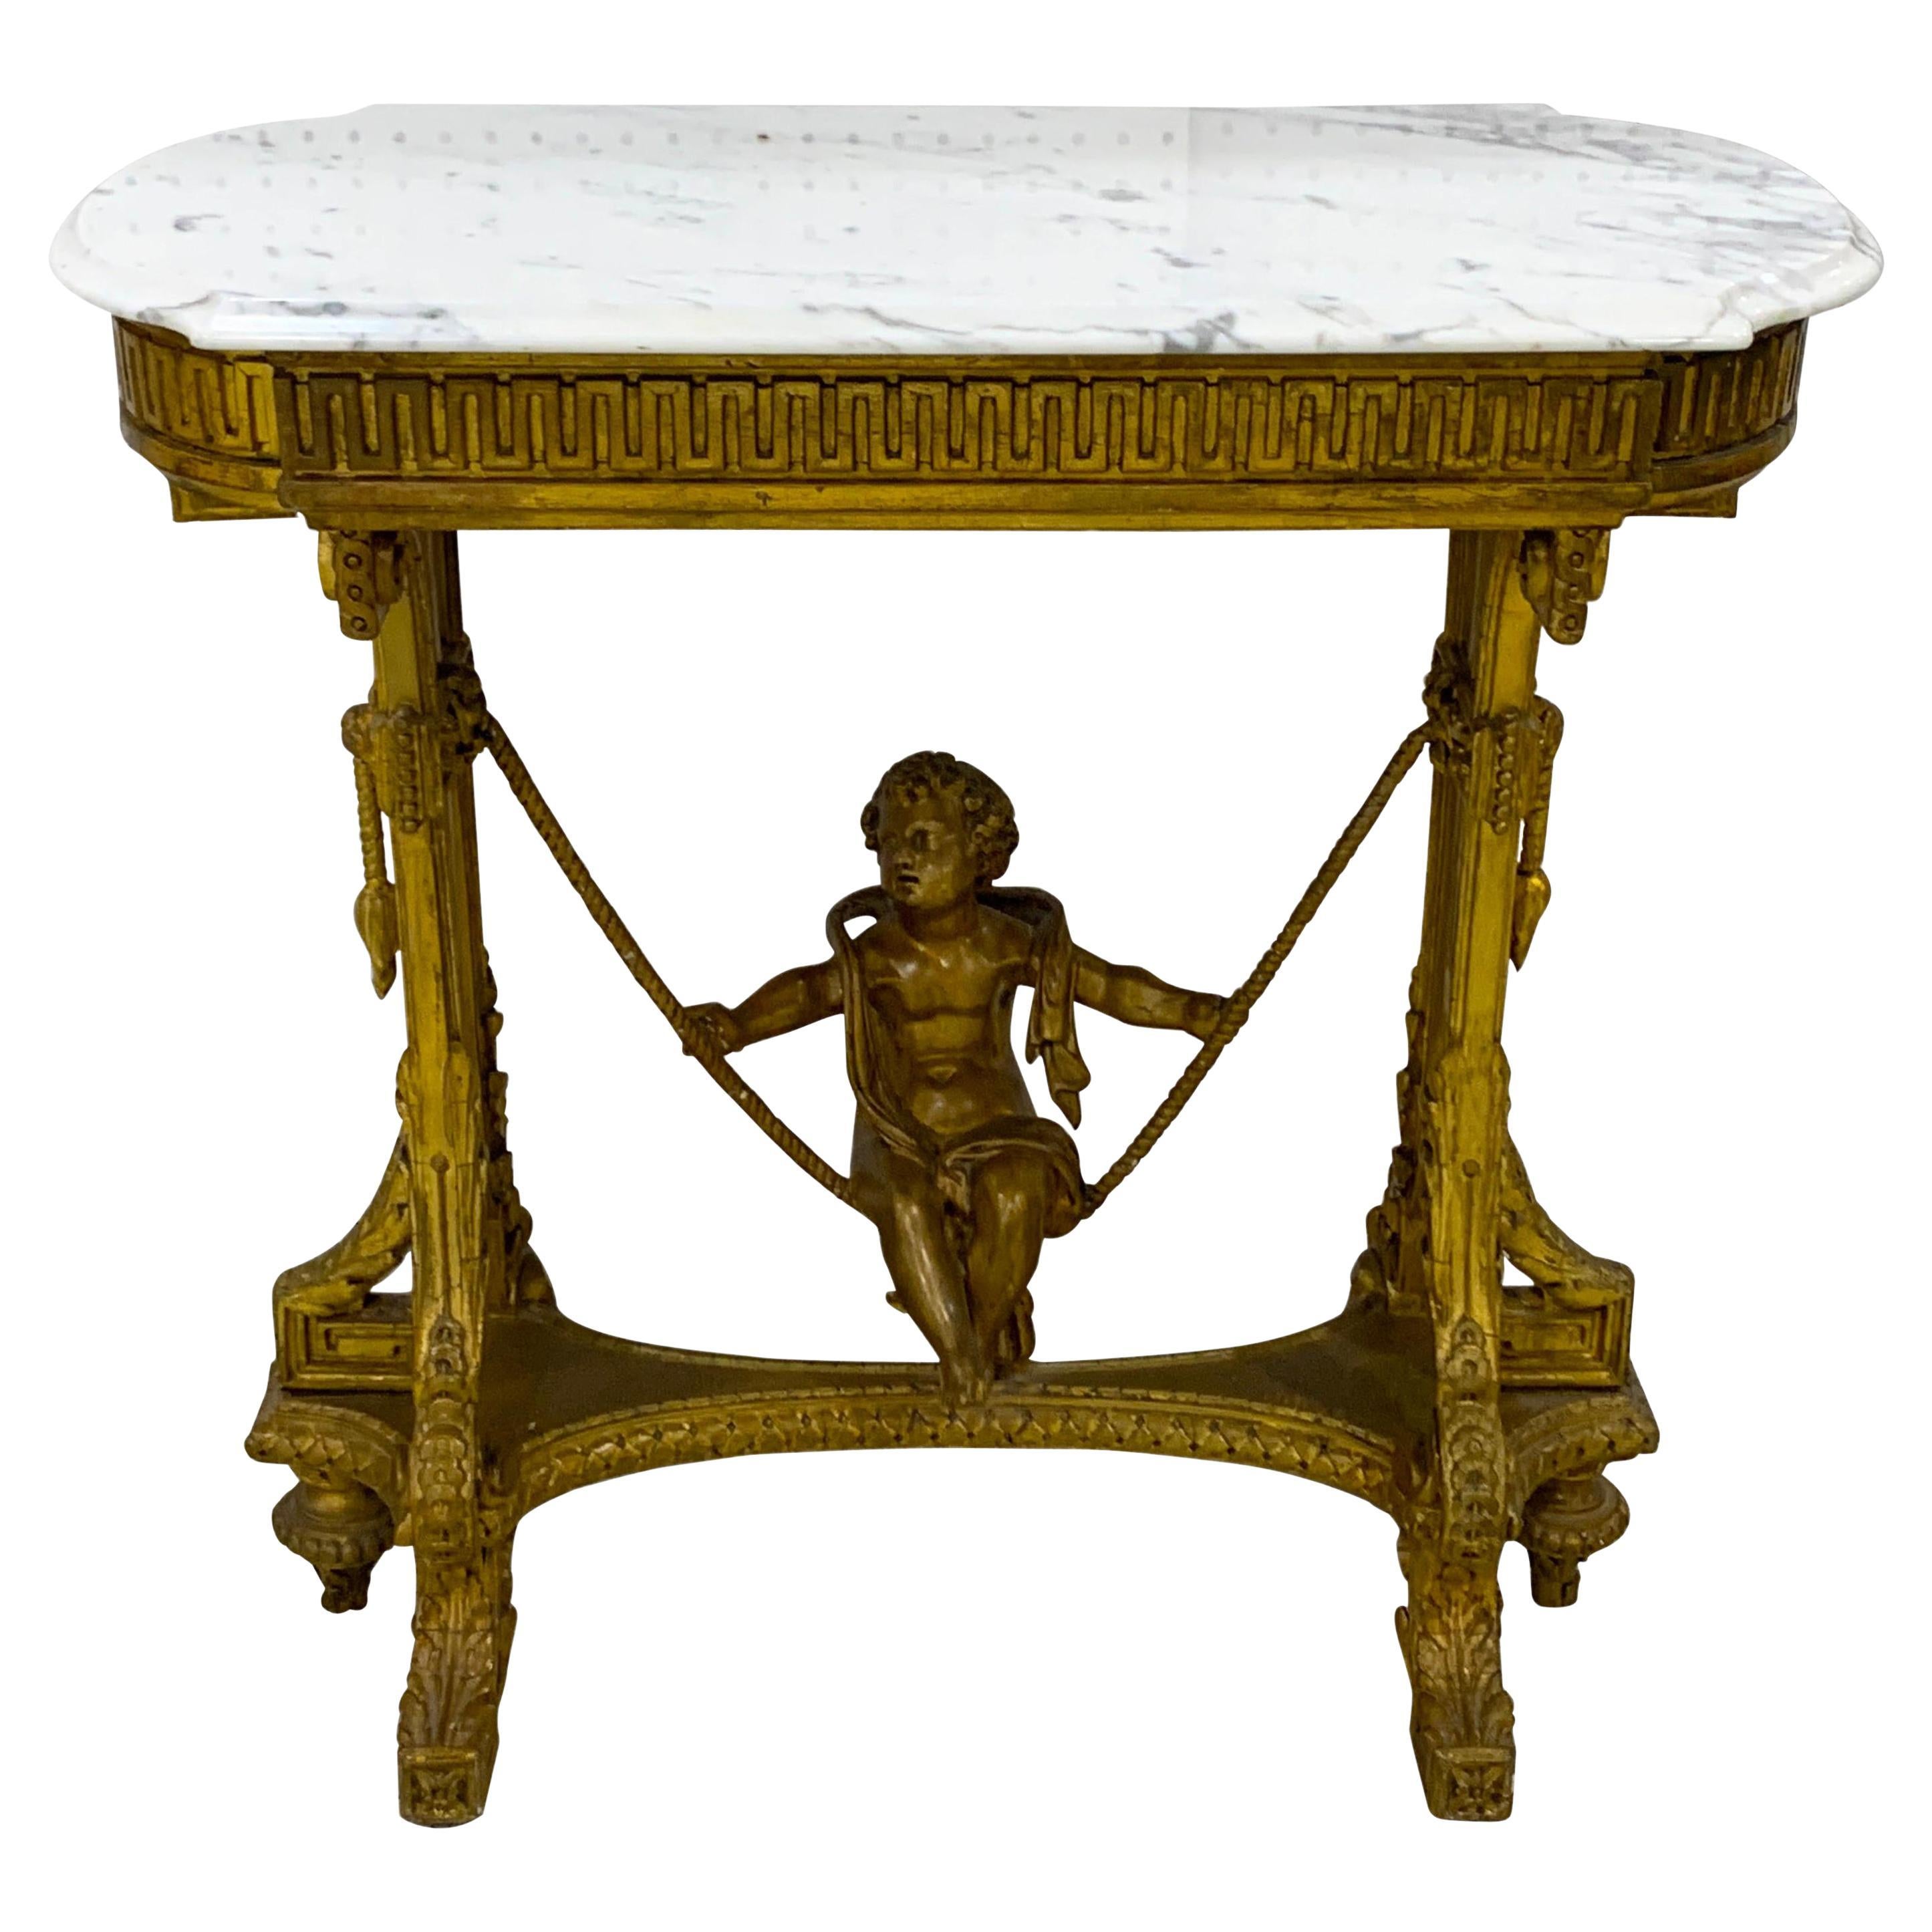 Exquisite French Giltwood Swinging Putto Marble Top Table/ Ferner For Sale